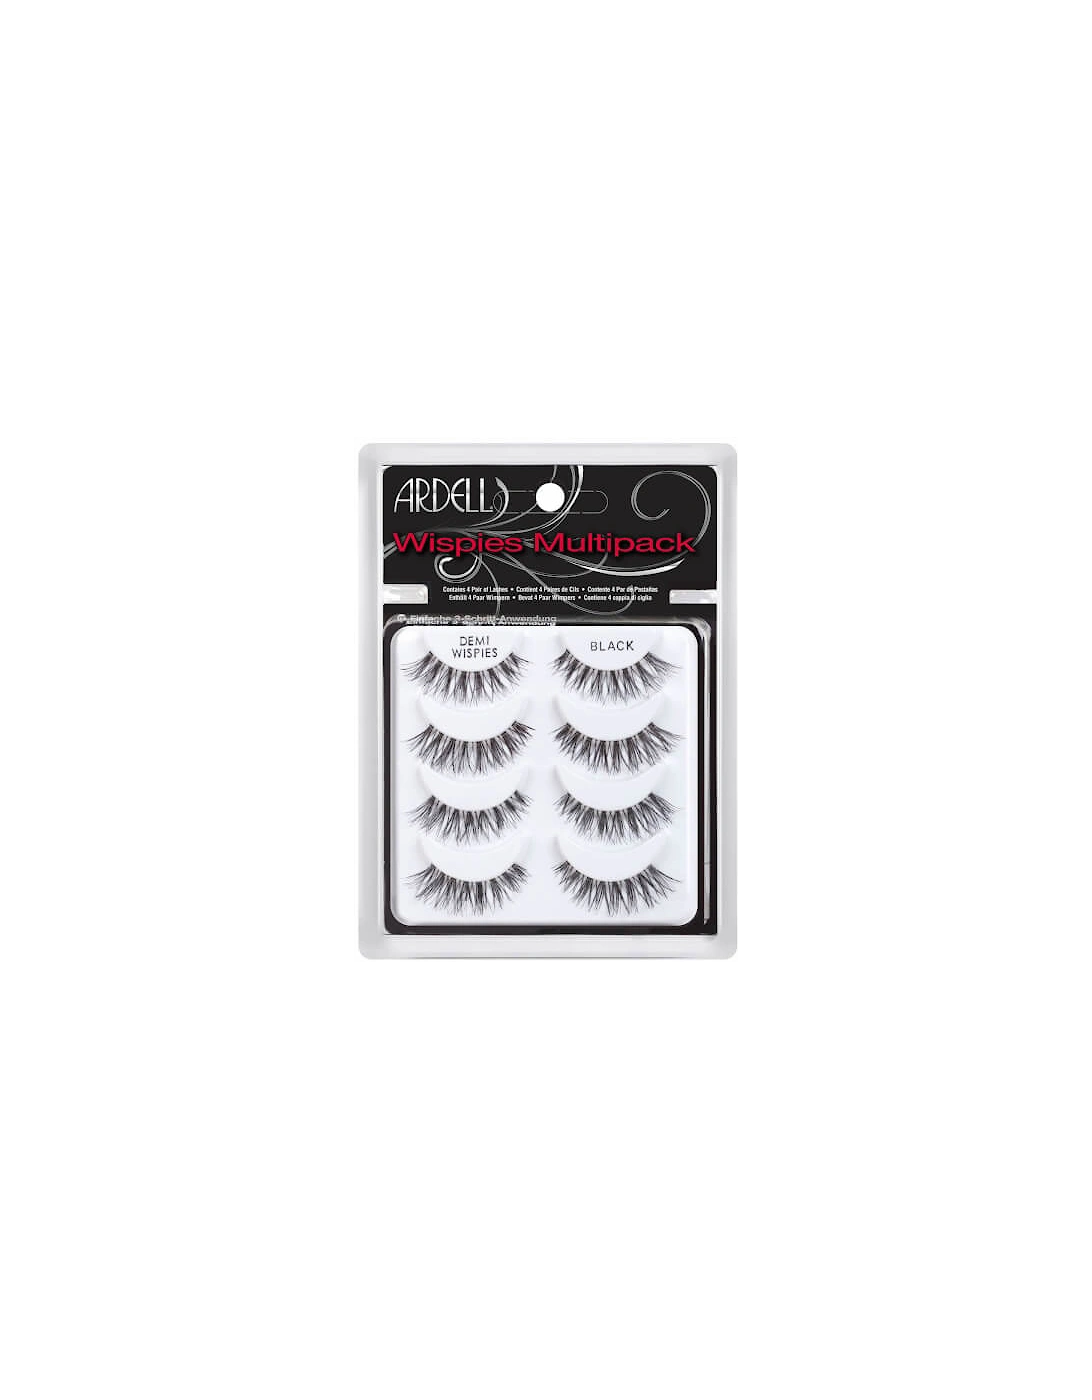 Demi Wispies False Lashes Multipack 4 Pack, 2 of 1